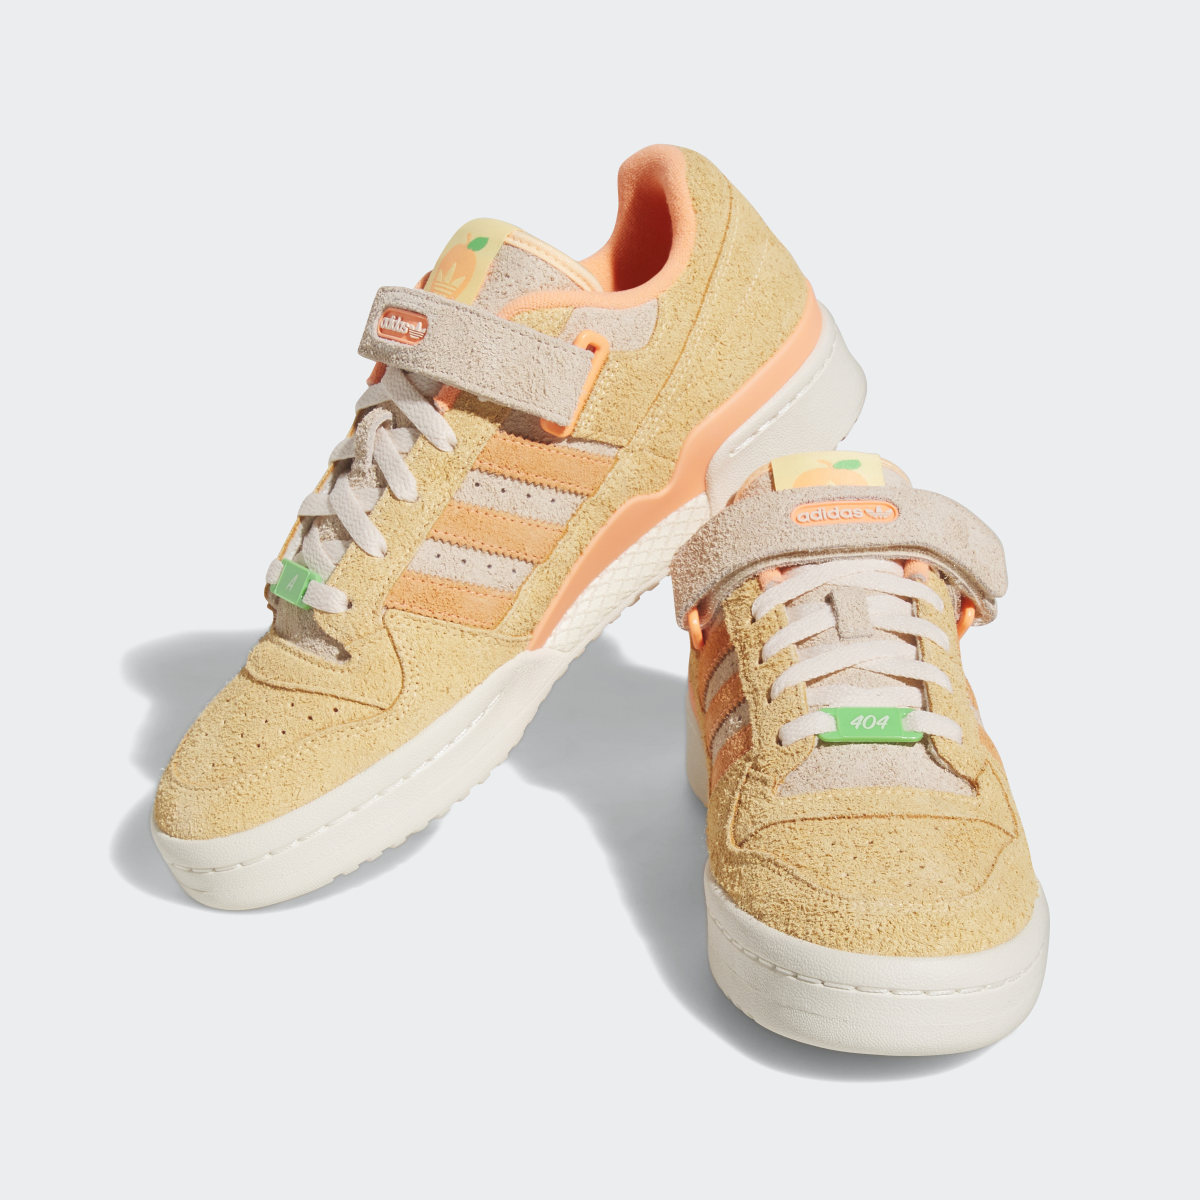 Adidas Forum Low Shoes. 5